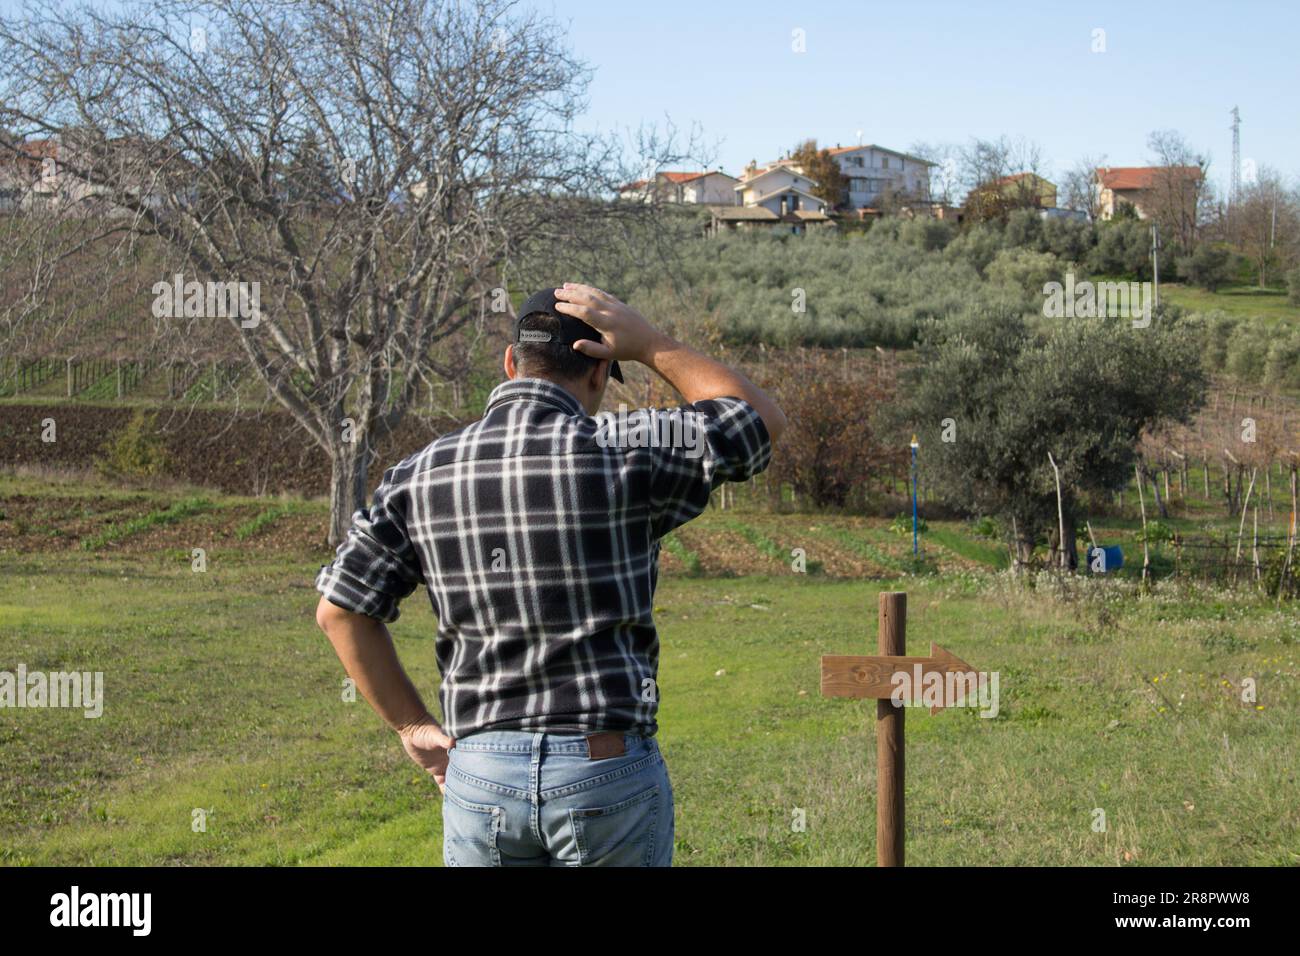 Image of a confused man from behind with a hand on his head, while observing a post with an arrow indicating the direction. Stock Photo